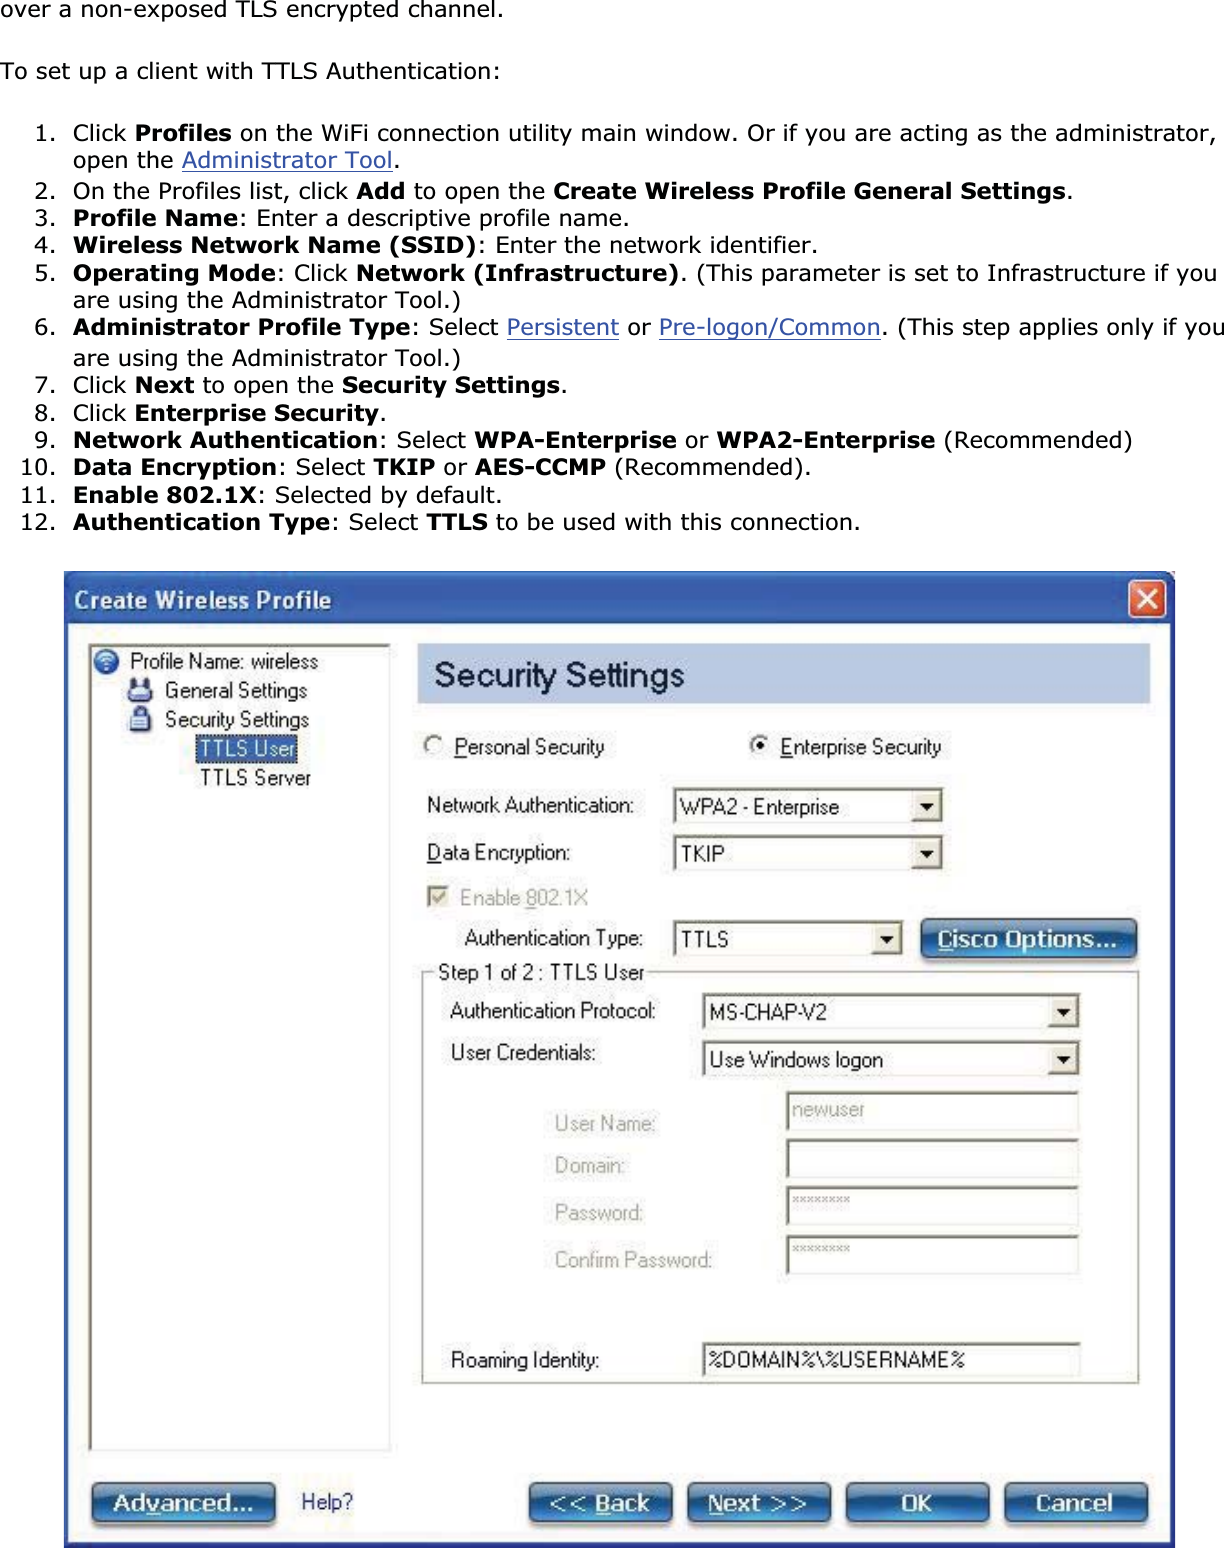 over a non-exposed TLS encrypted channel.To set up a client with TTLS Authentication:1. Click Profiles on the WiFi connection utility main window. Or if you are acting as the administrator, open the Administrator Tool.2. On the Profiles list, click Add to open the Create Wireless Profile General Settings.3. Profile Name: Enter a descriptive profile name.4. Wireless Network Name (SSID): Enter the network identifier.5. Operating Mode: Click Network (Infrastructure). (This parameter is set to Infrastructure if you are using the Administrator Tool.)6. Administrator Profile Type: Select Persistent or Pre-logon/Common. (This step applies only if you are using the Administrator Tool.)7. Click Next to open the Security Settings.8. Click Enterprise Security.9. Network Authentication: Select WPA-Enterprise or WPA2-Enterprise (Recommended)10. Data Encryption: Select TKIP or AES-CCMP (Recommended).11. Enable 802.1X: Selected by default.12. Authentication Type: Select TTLS to be used with this connection.